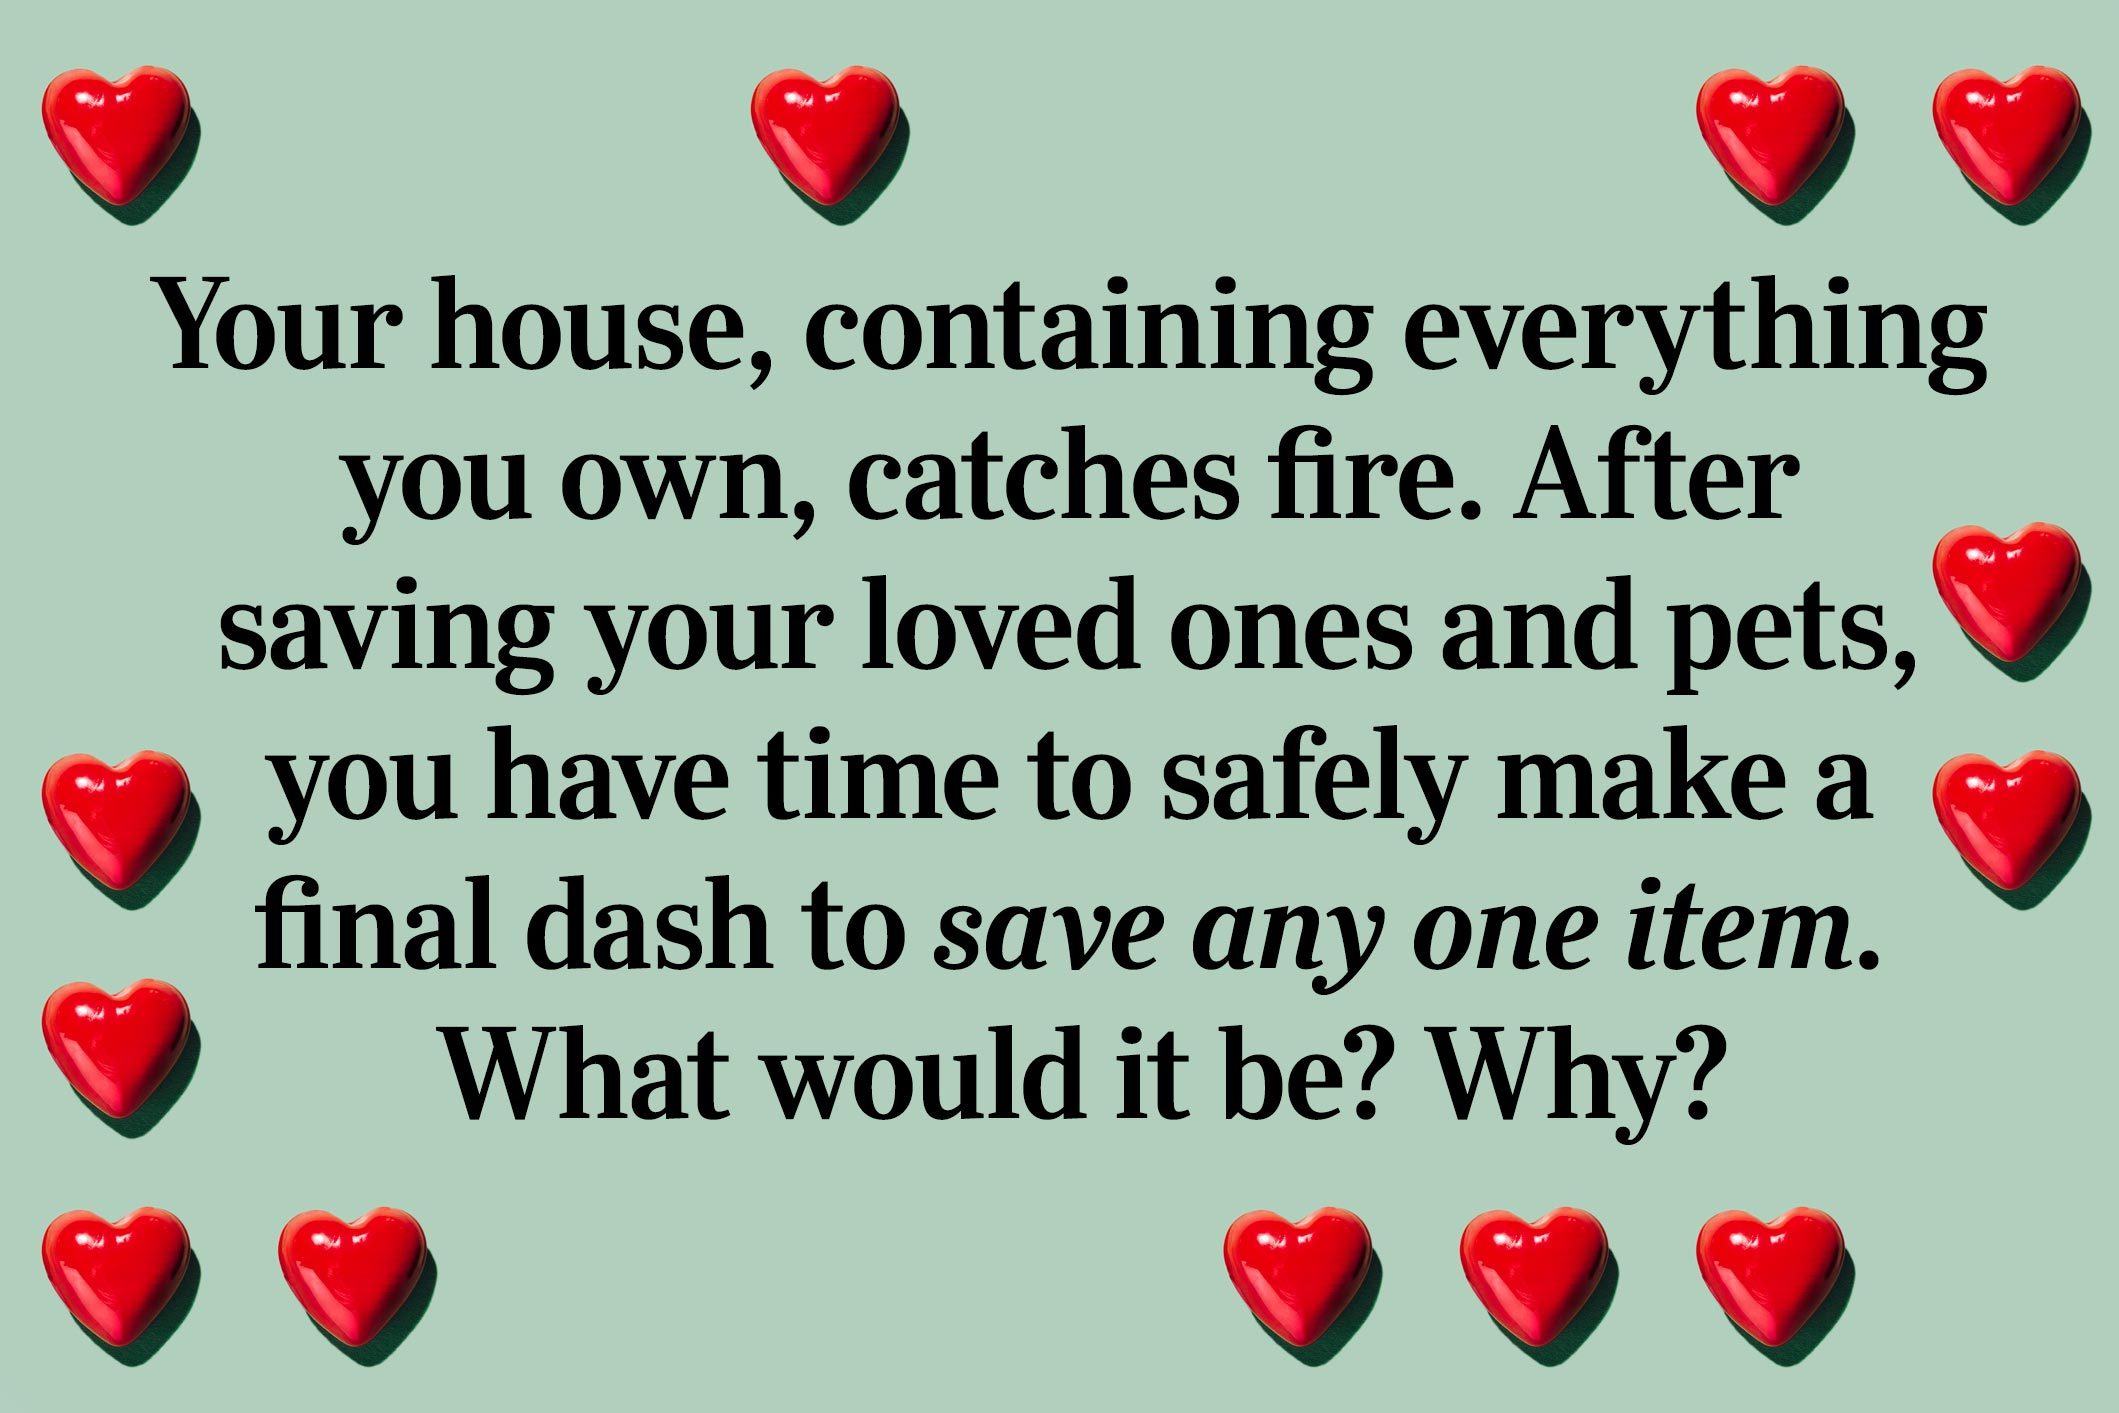 <p>Your house, containing everything you own, catches fire. After saving your loved ones and pets, you have time to safely make a final dash to save any one item. What would it be? Why?</p>